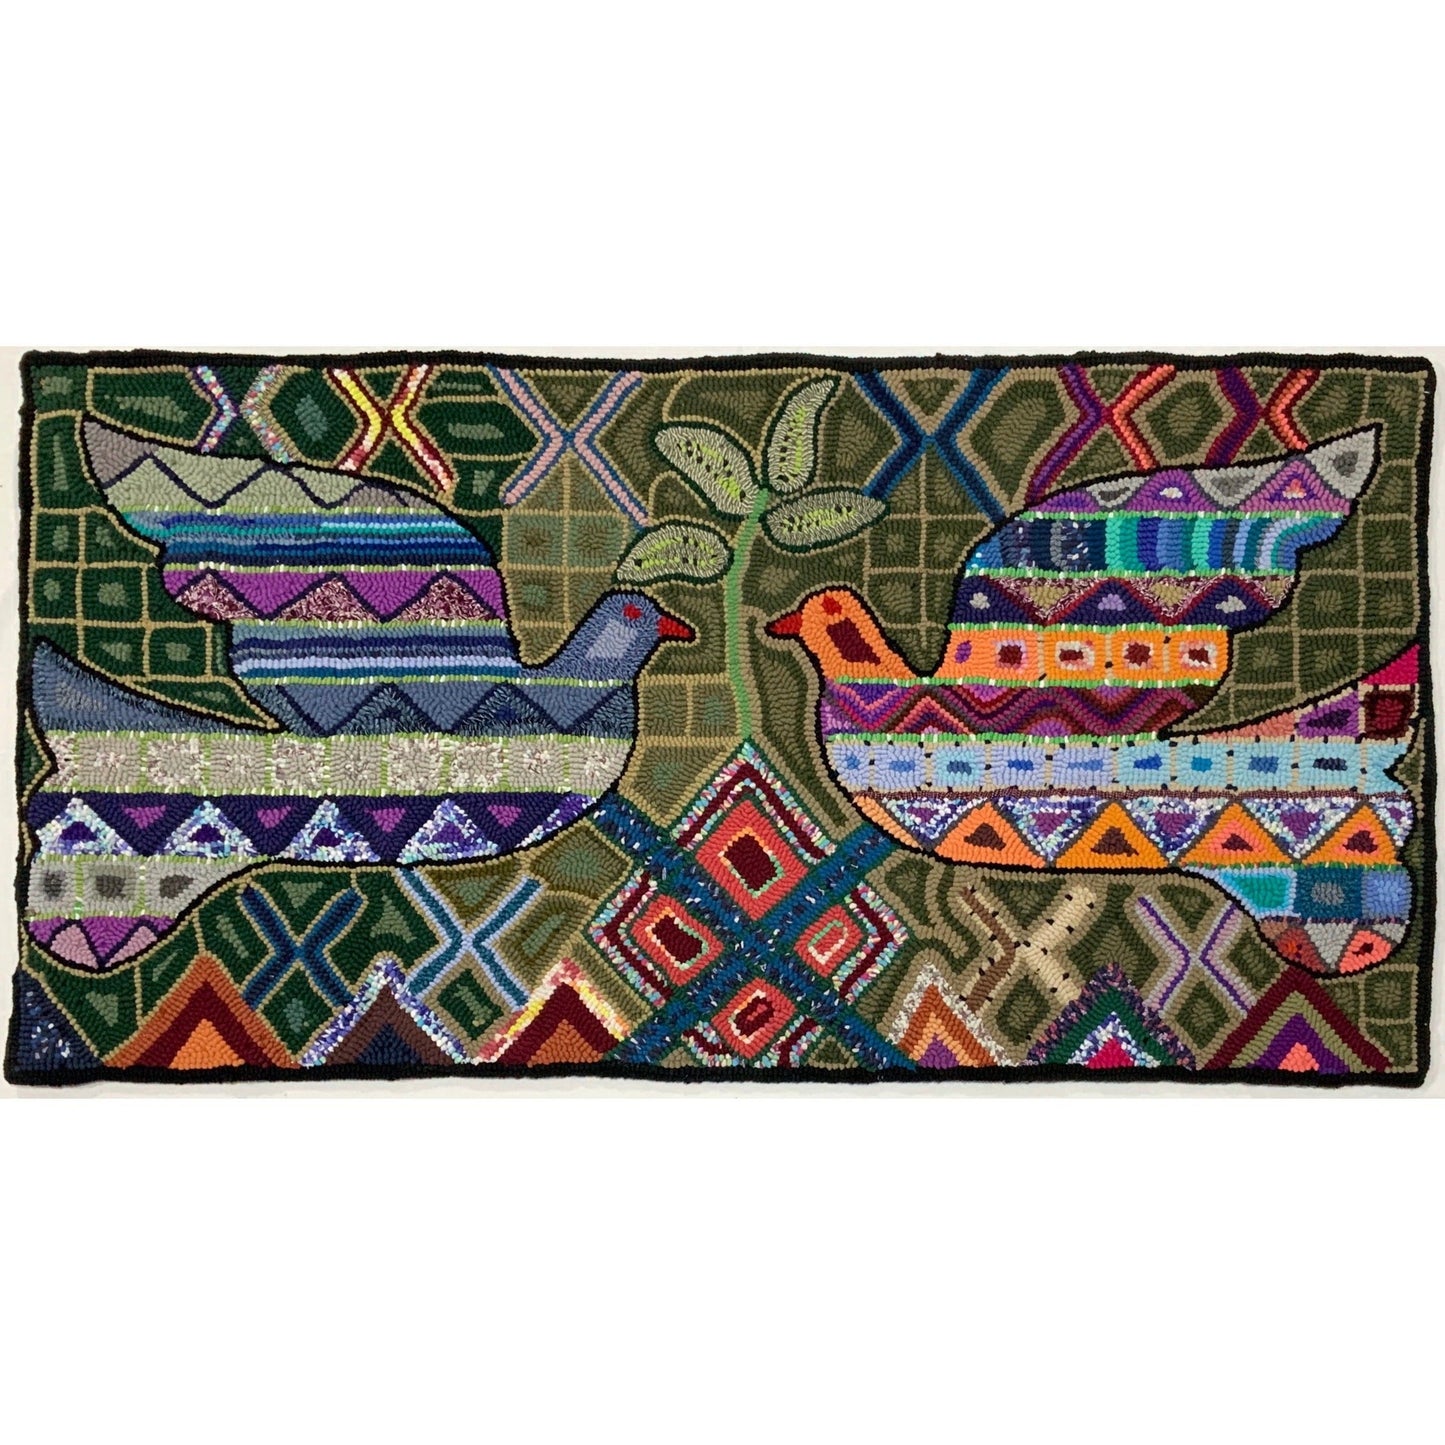 Guatemala, Multicolores/ Silvia Ajcot Solis, "Meeting of the Minds" Hand-Hooked Rug